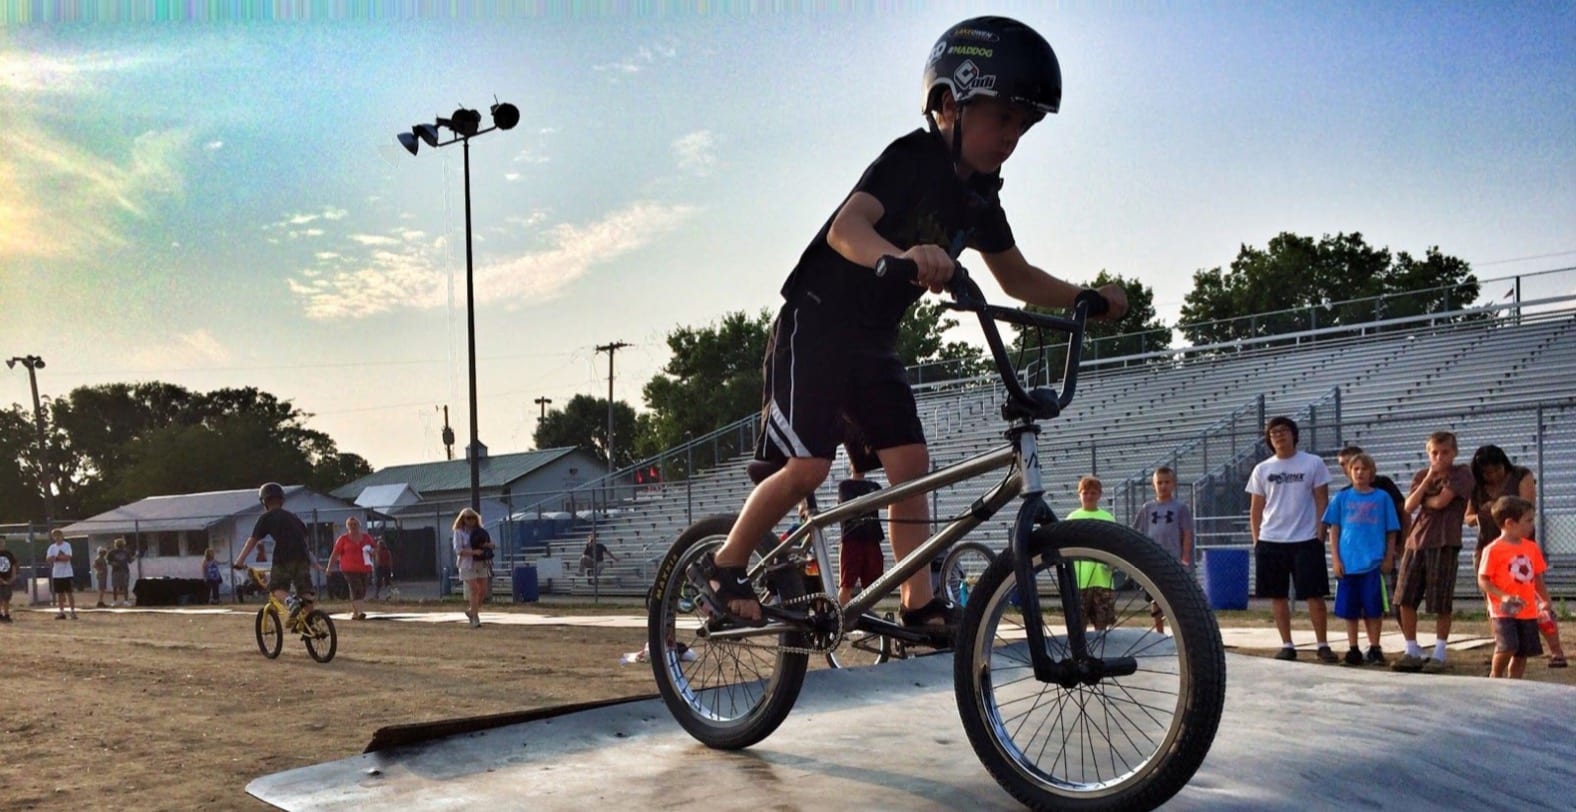 Retired wheel once again Optional Add-On: "Learn with The Pros" Padded Kids BMX Bike Jump  Interactive Youth Experience - Mega Jump Motivational Experience - BMX  Stunt Show - Event Entertainment & Guest Speaker Ideas